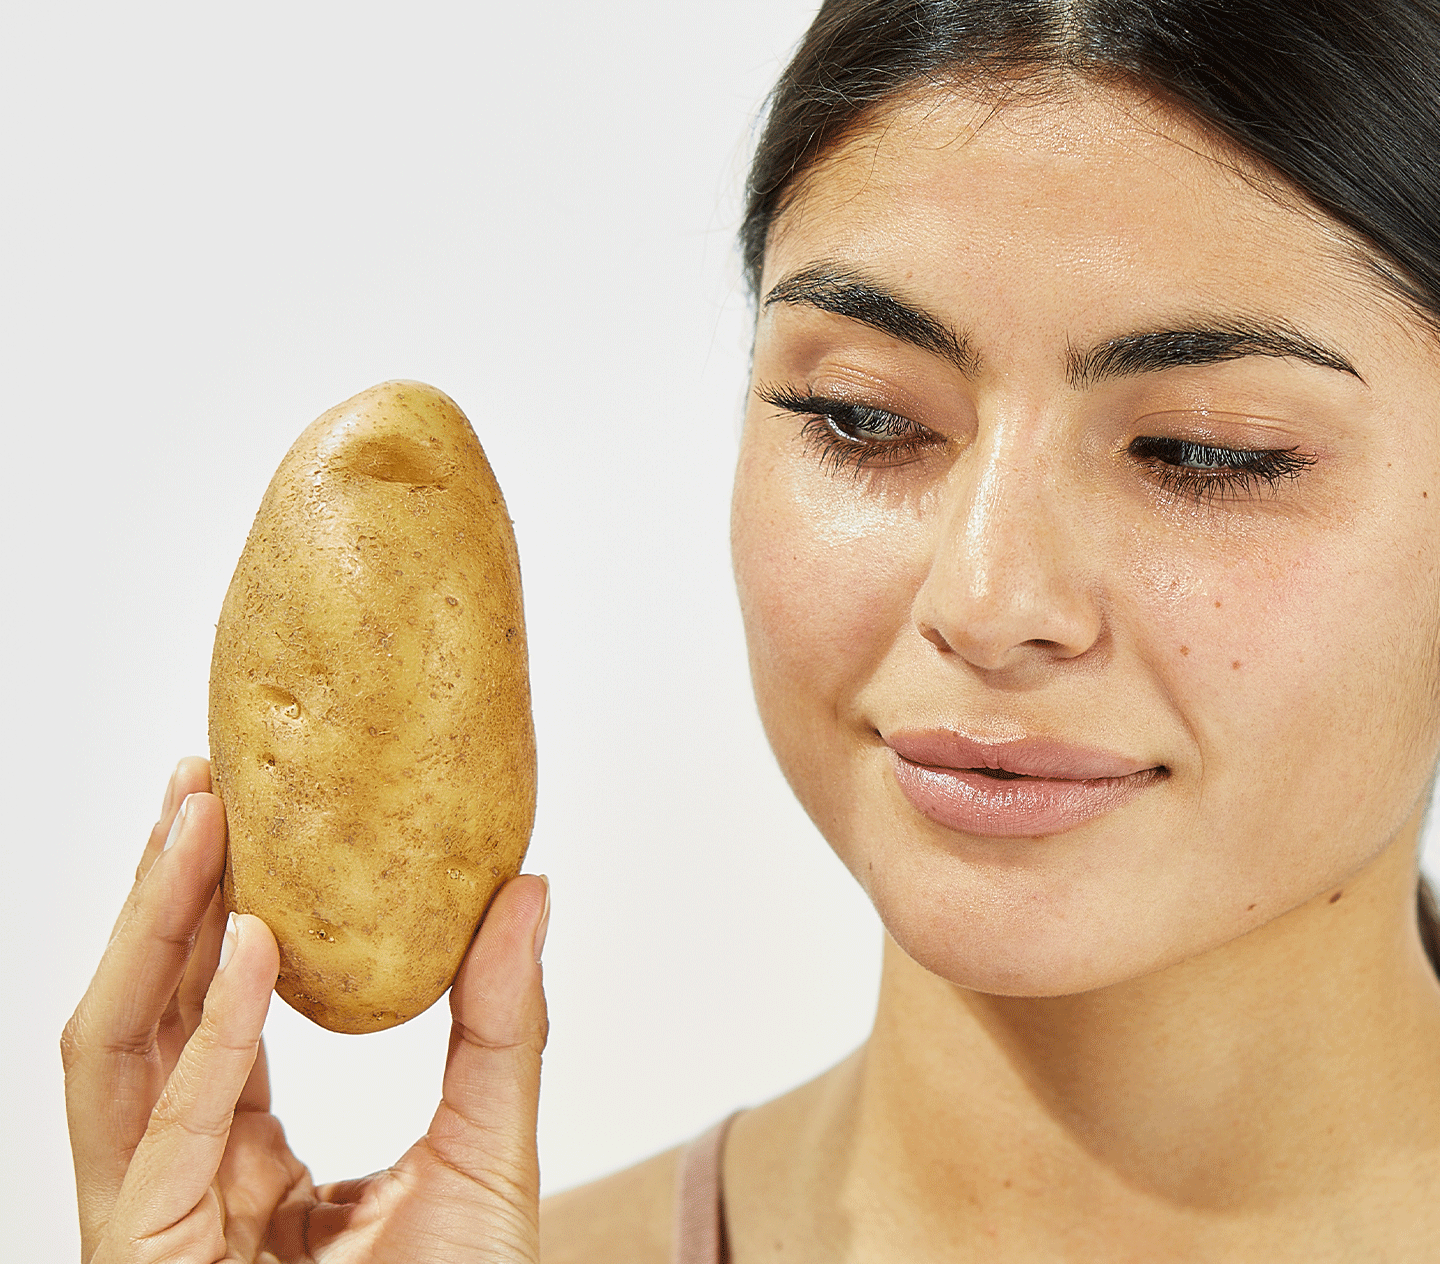 GIF image of a girl holding a potato up to her head and looking at it, and then the potato peel is replaced with Beekman 1802's Potato peel bottle and model has surprised look on her face.